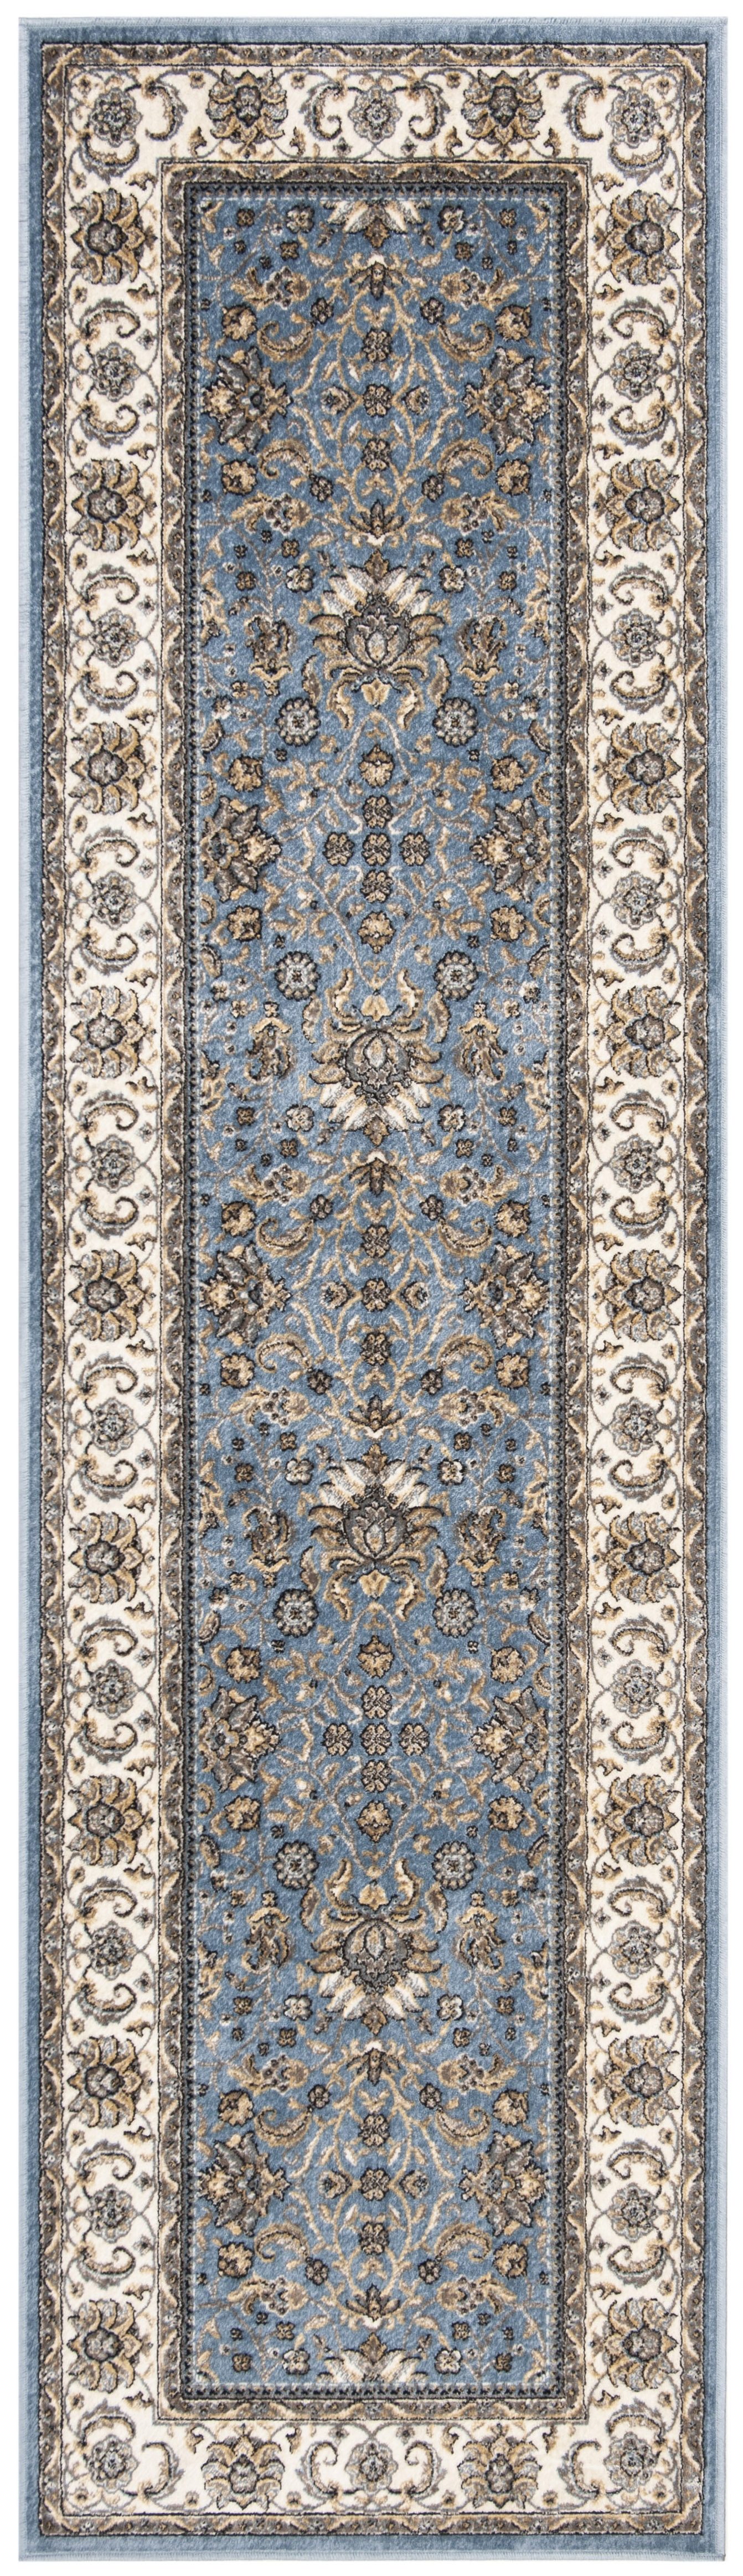 Arlo Home Woven Area Rug, ATL671L, Blue/Ivory,  2' 2" X 3' 7" - Image 0